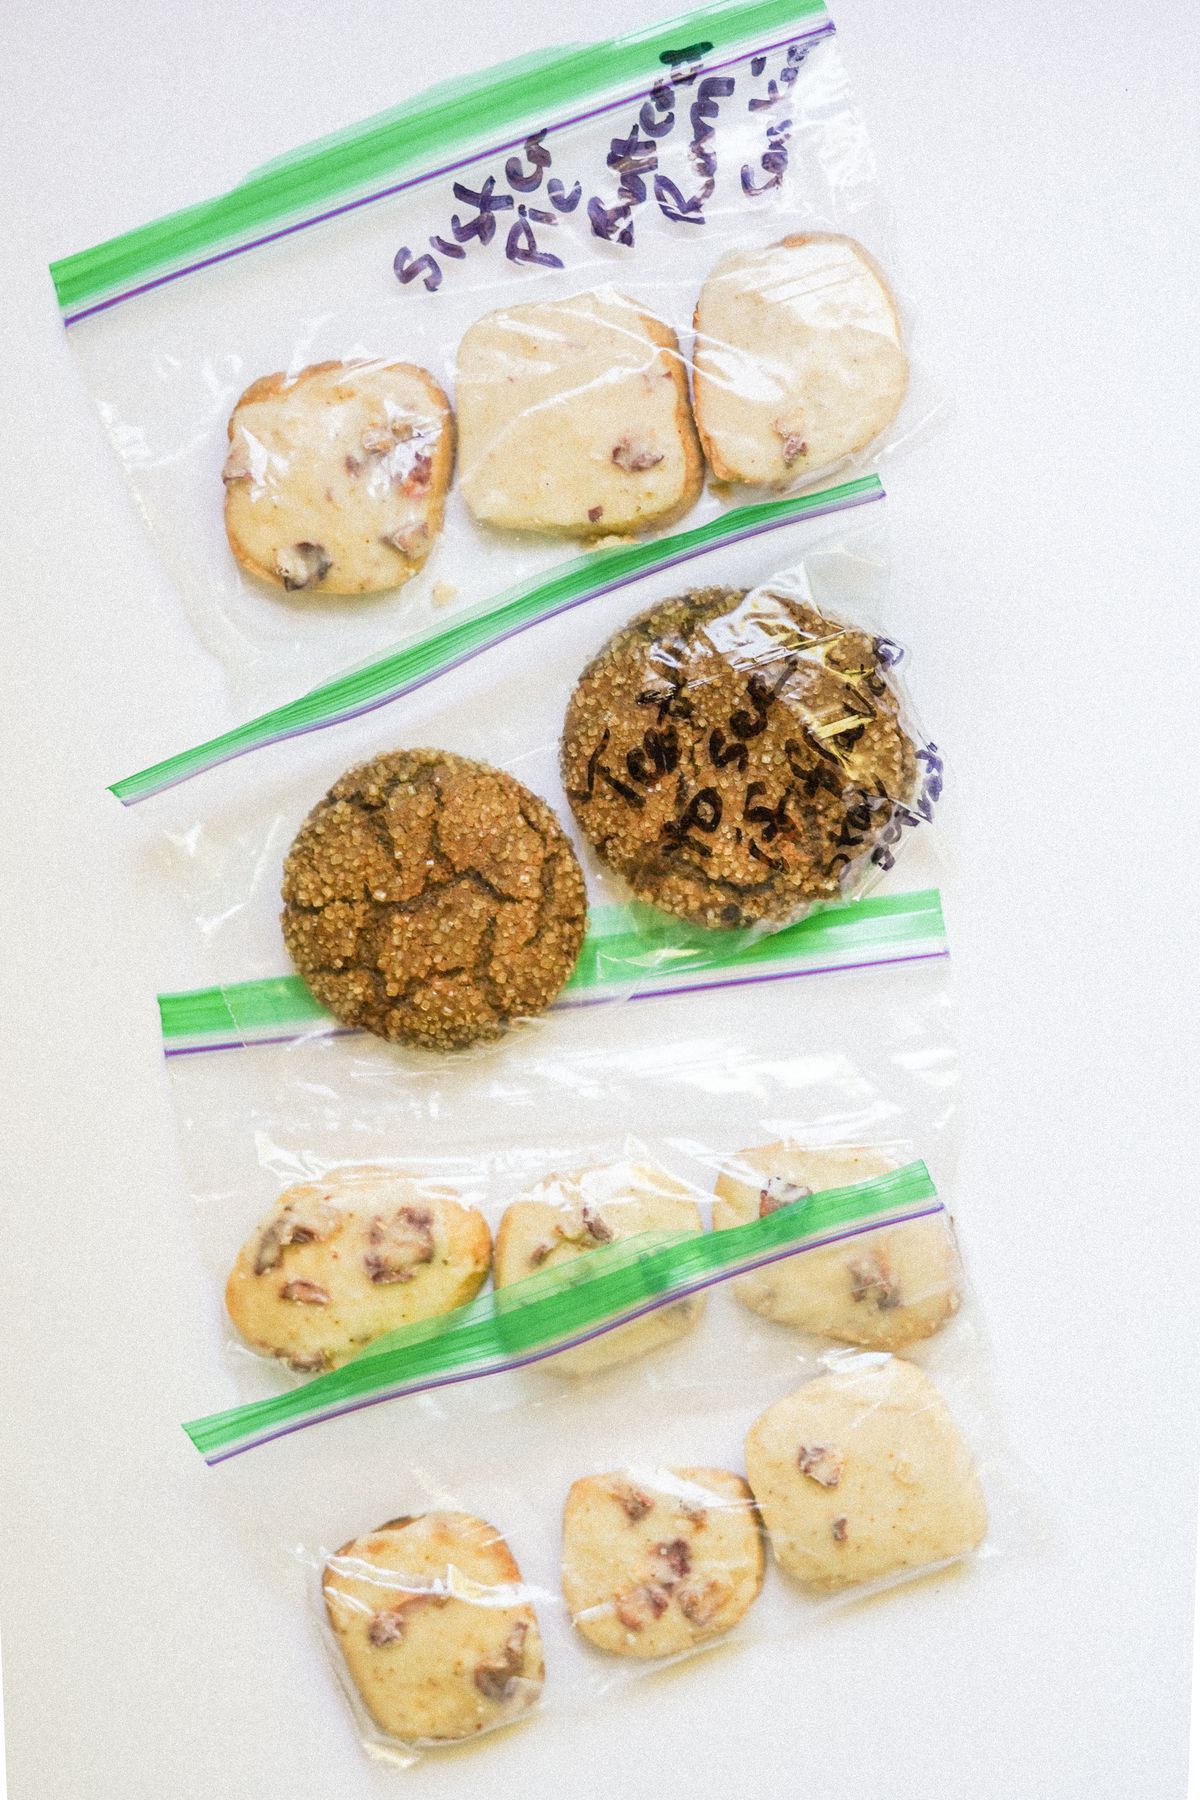 Two different kinds of cookies, placed in groups of 2 or 3 in small zip-top plastic bags.